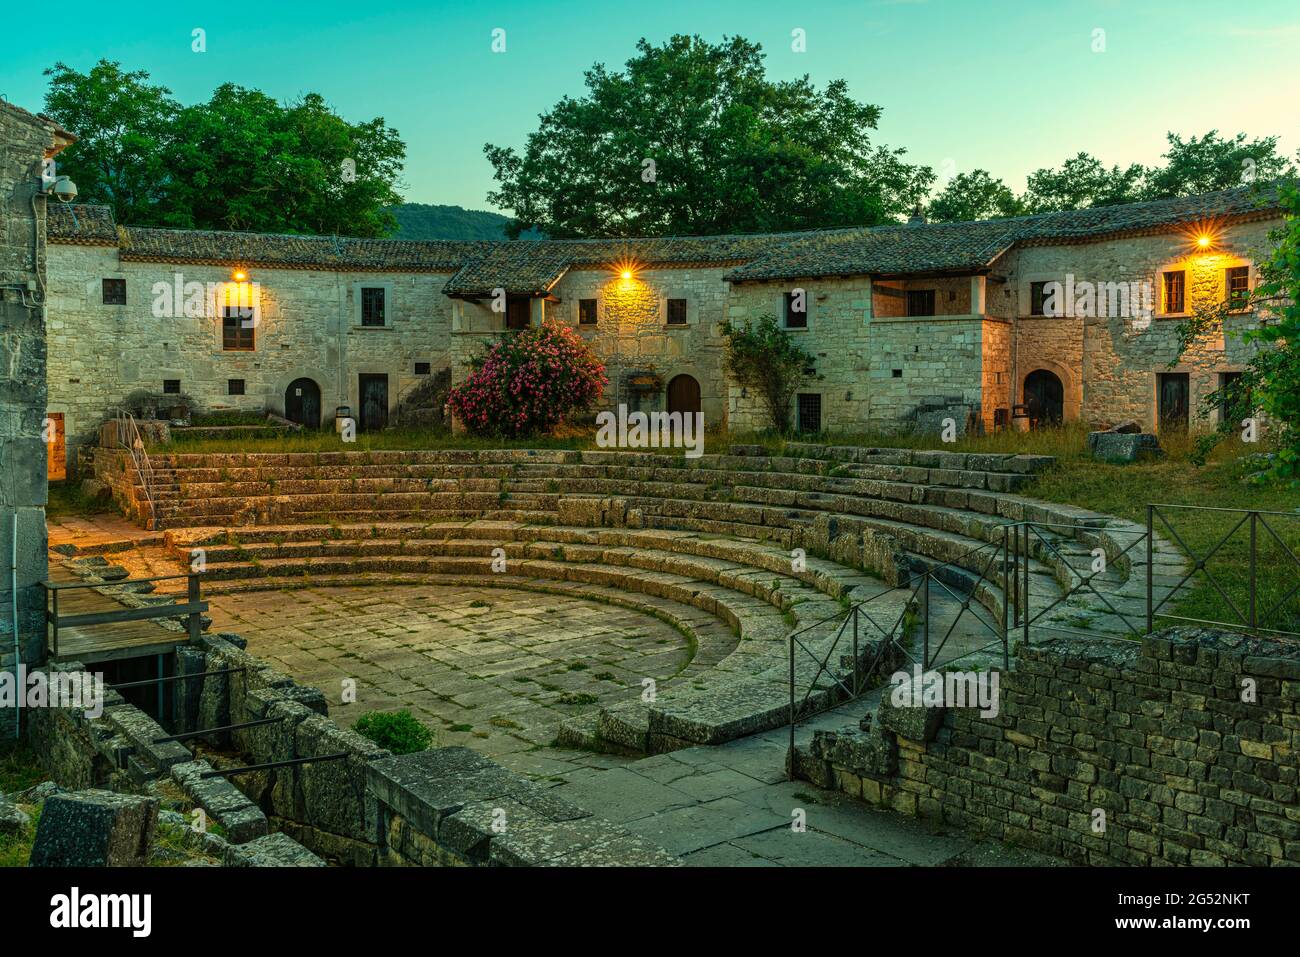 Roman theater in the ancient city of Altilia, today Sepino in Molise, at dusk in the Archaeological Park of Sepino. Sepino,Isernia, Molise Stock Photo